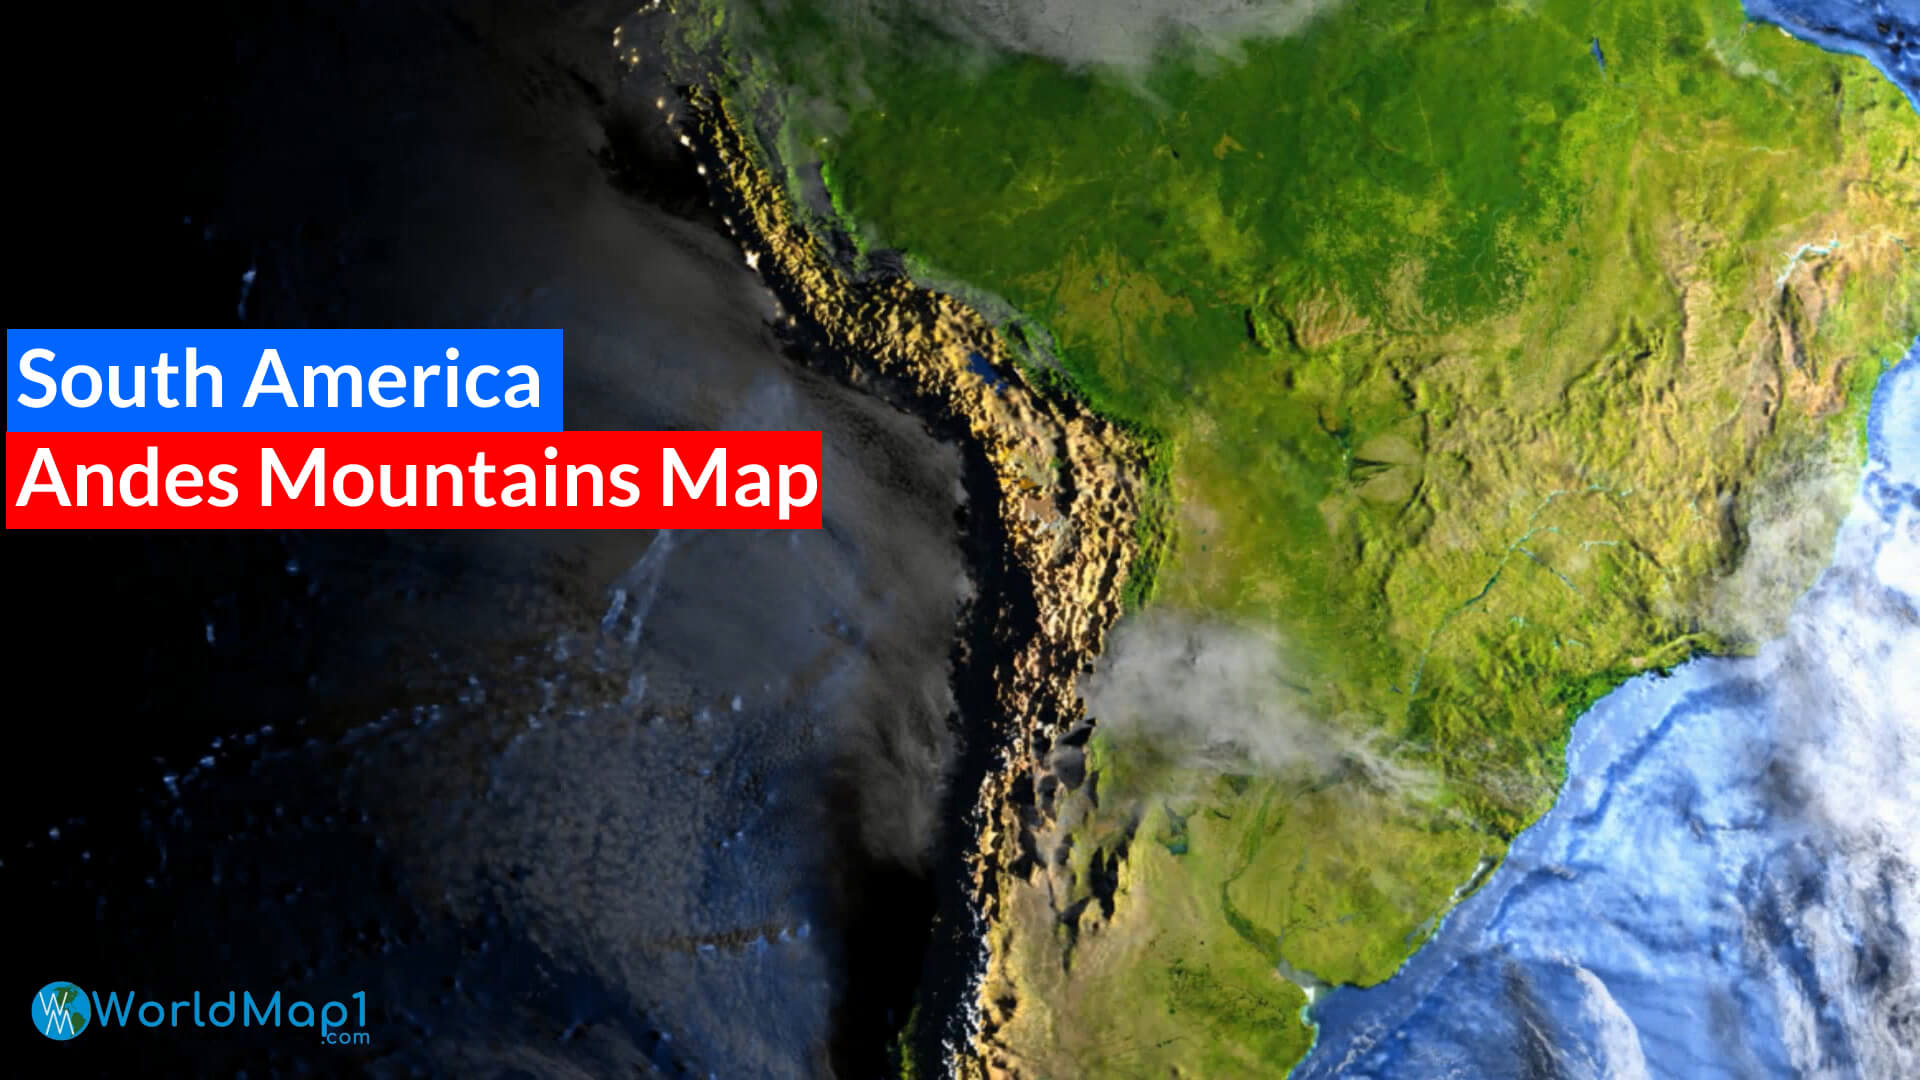 South America Andes Mountains Map